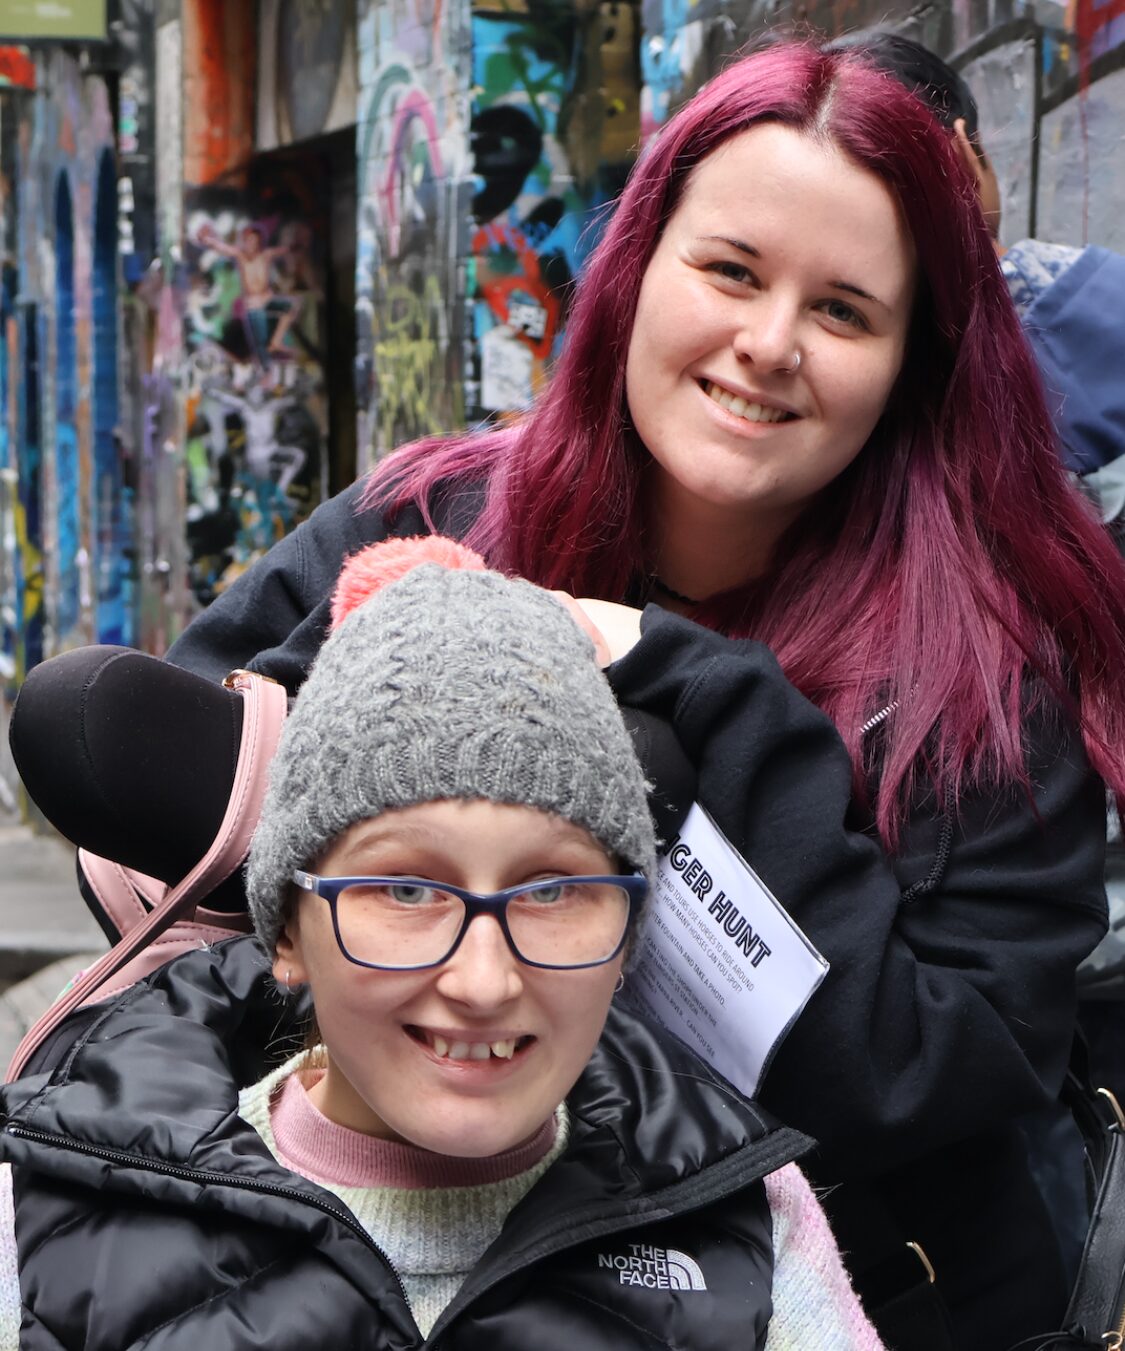 Reach and Belong runs NDIS excursions with social groups